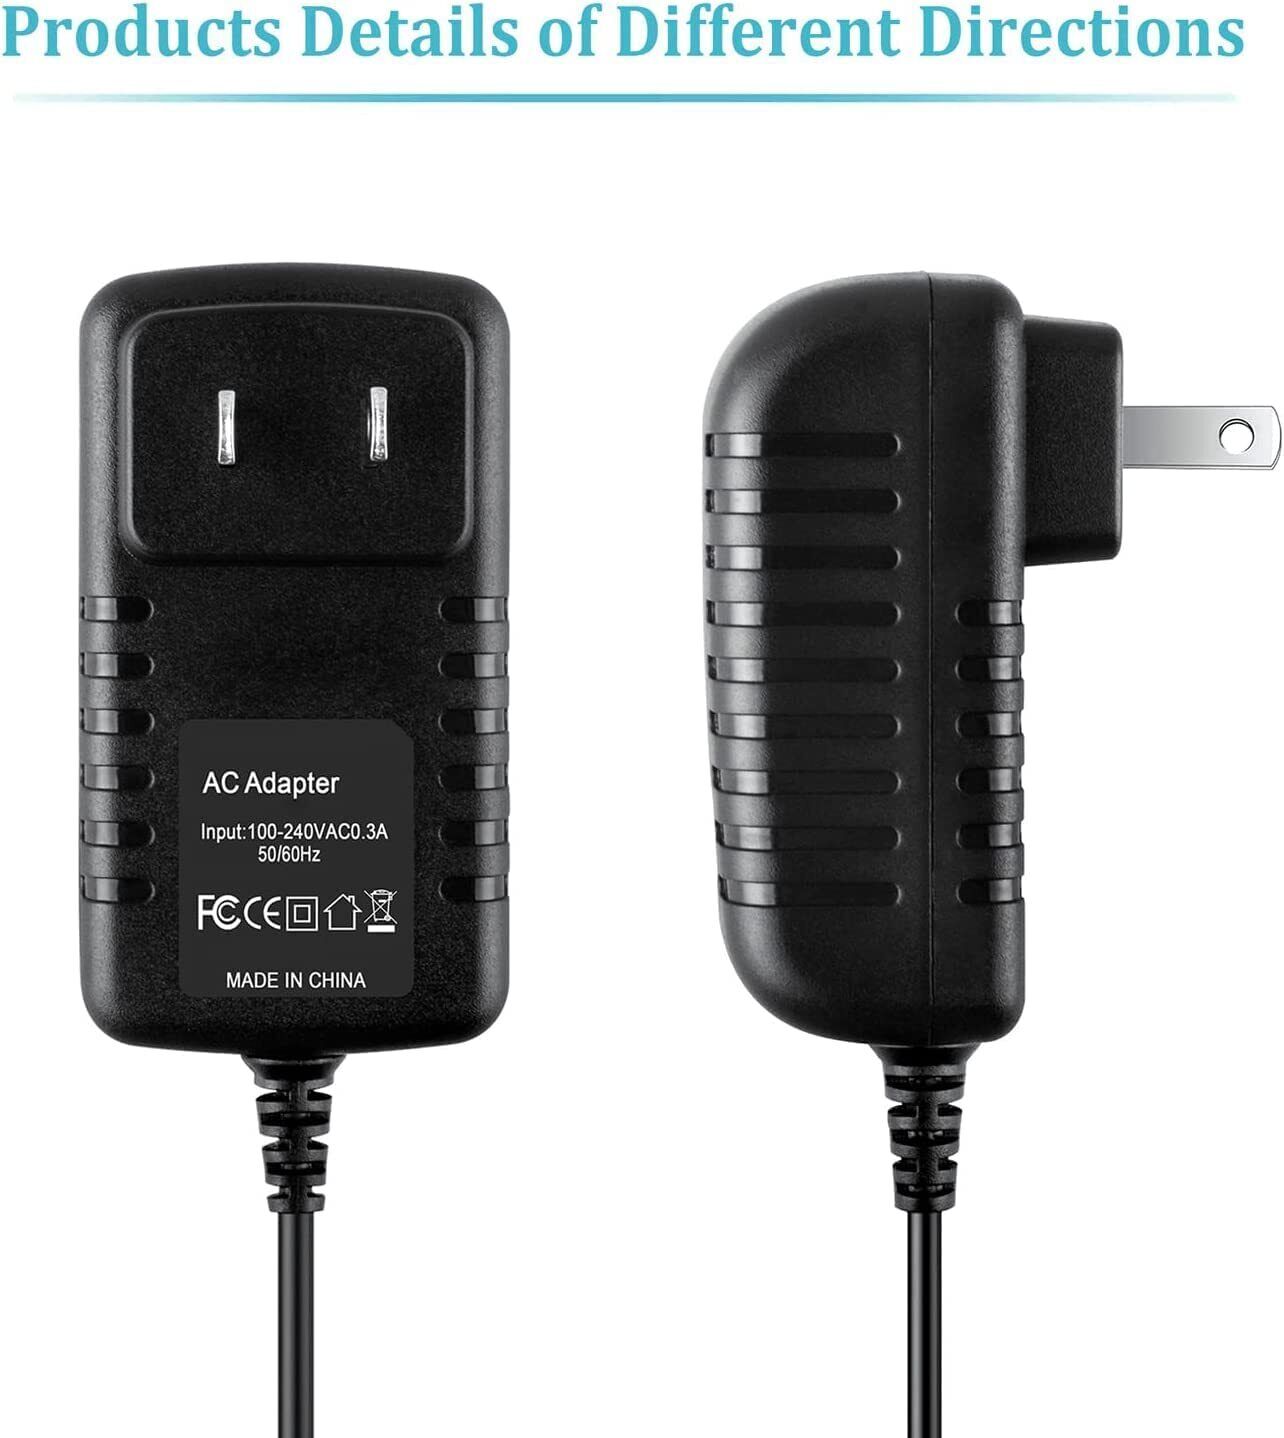 AC DC Adapter For SDL9035 SDL9037 SDL9040 SINGING MACHINE FIESTA Karaoke System Type AC/DC Adapter Features Powered Co